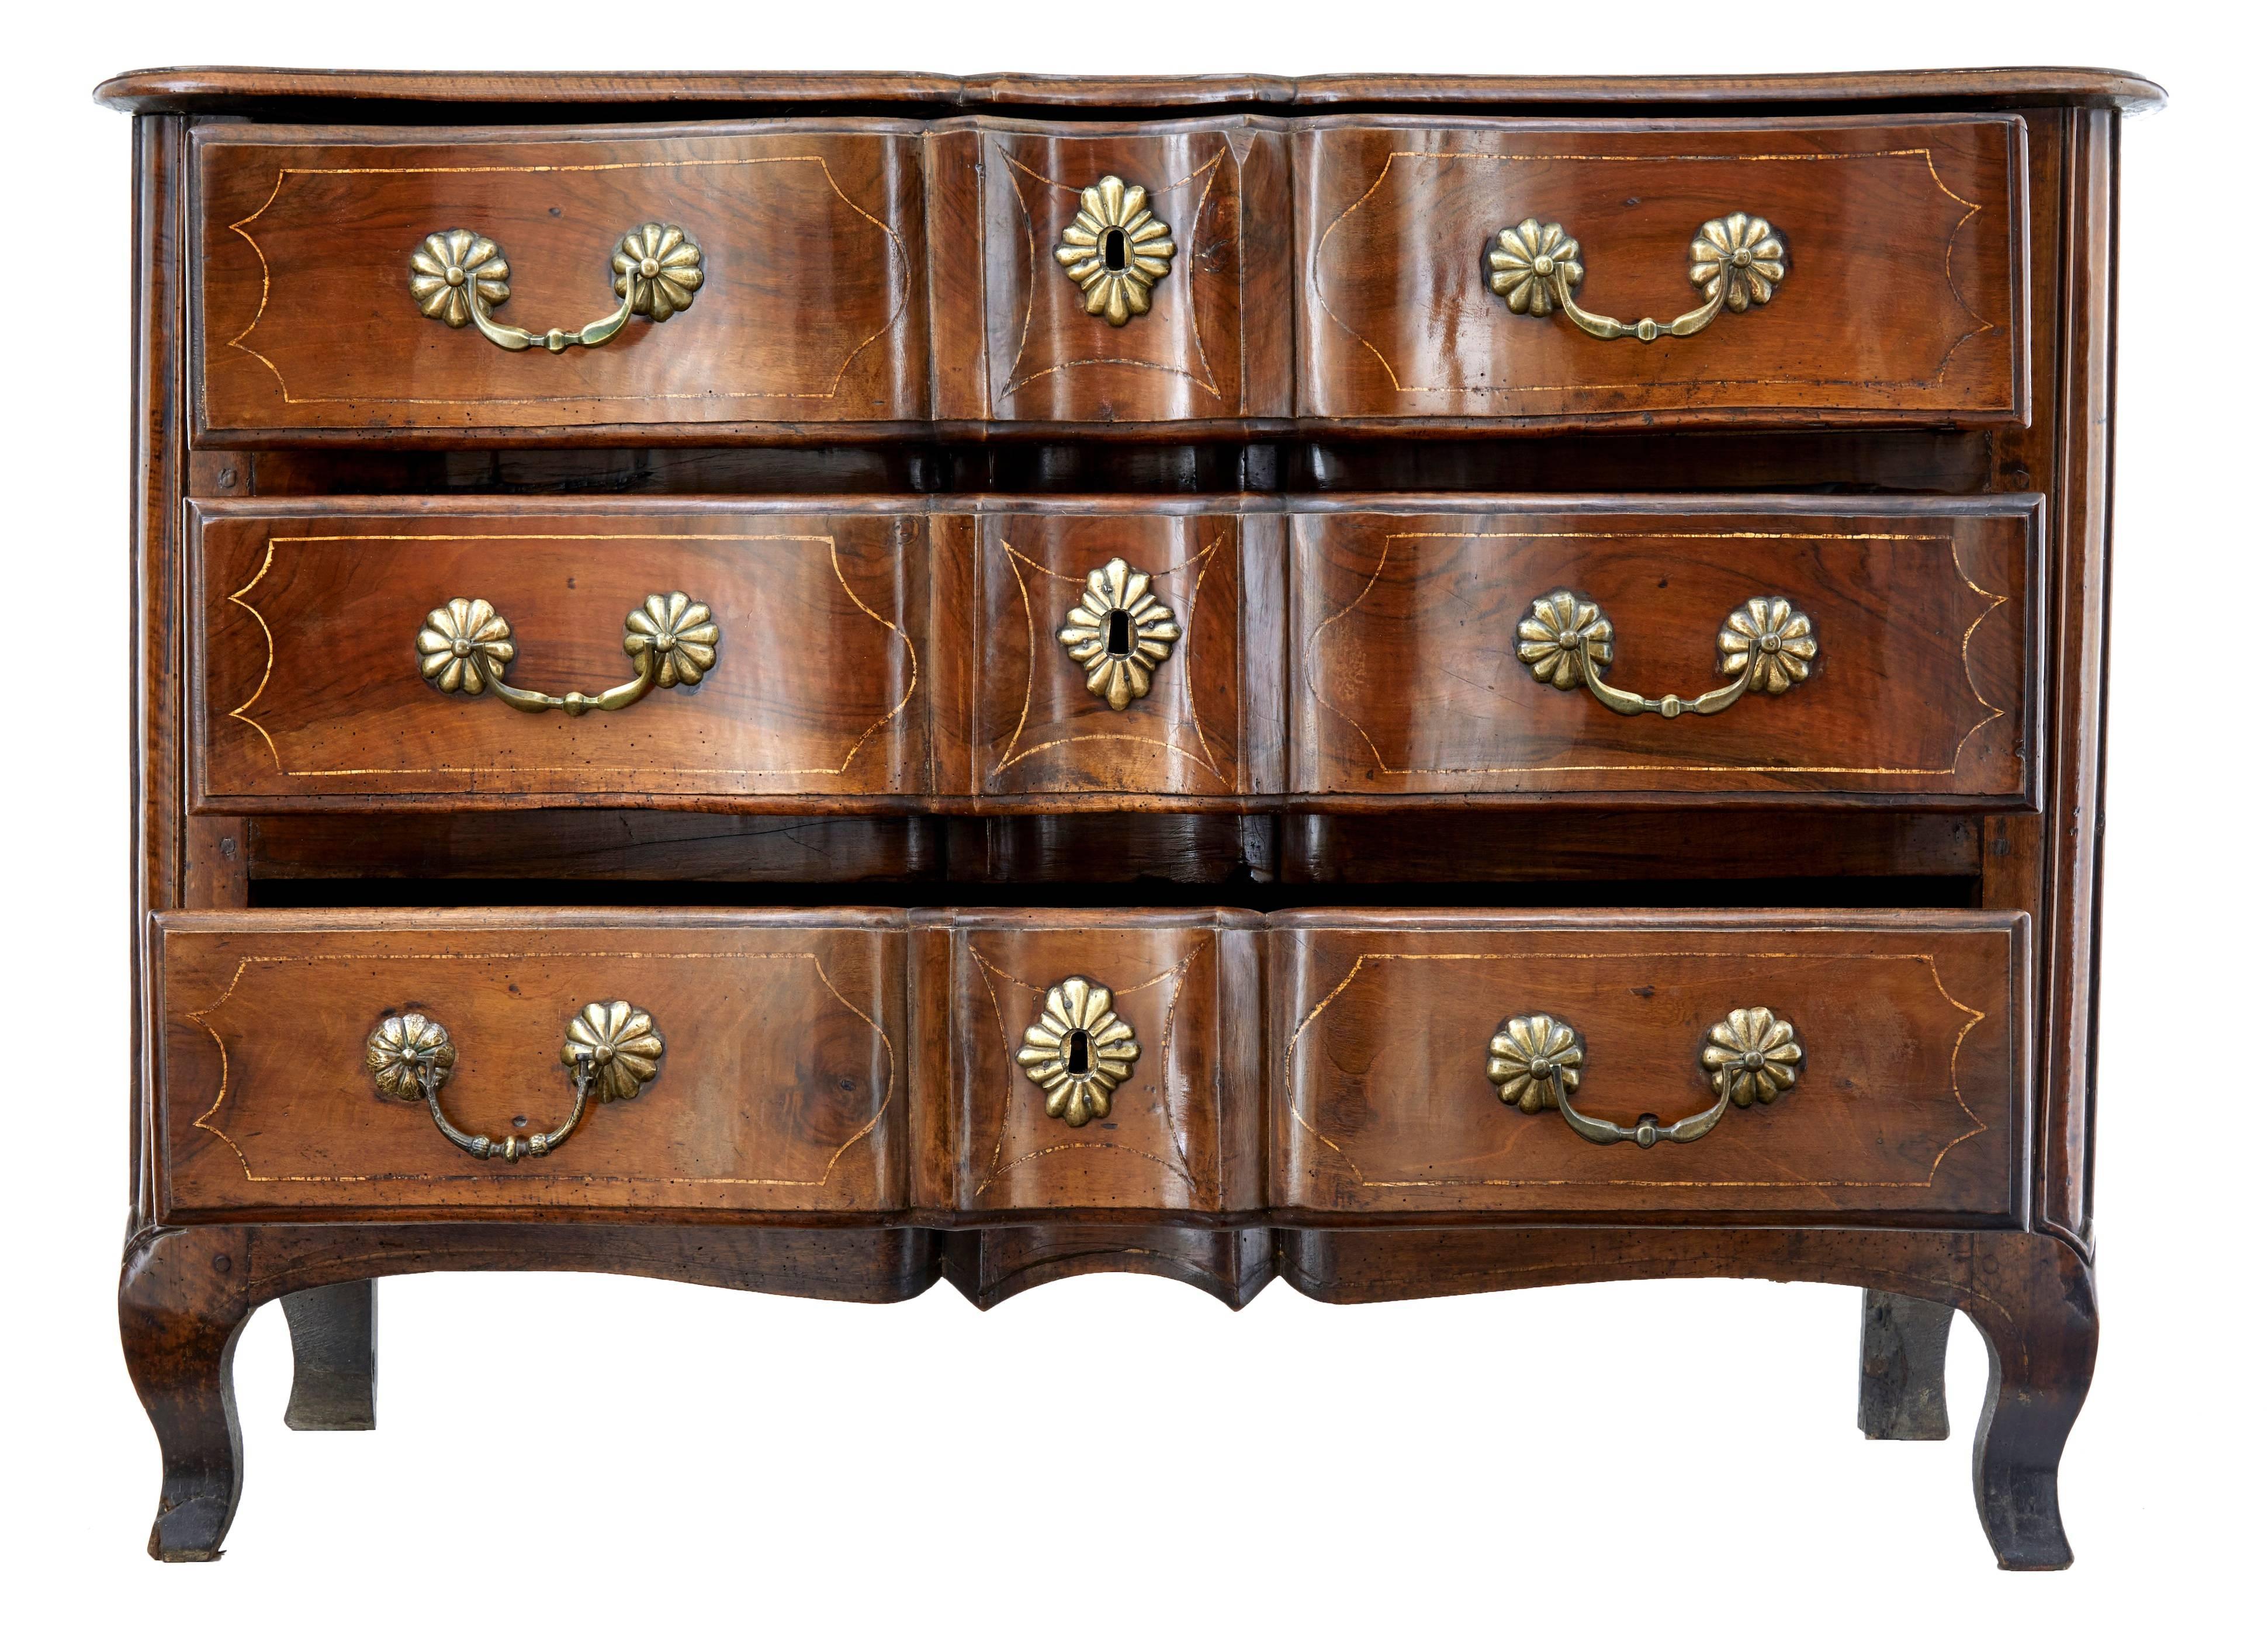 Rare piece of French 18th century Furniture, circa 1740.
Beautiful walnut three-drawer commode.
Stringing to top and drawer fronts. Serpentine and shaped front with original handles and escutheons.
Good original color and patina.

Evidence of